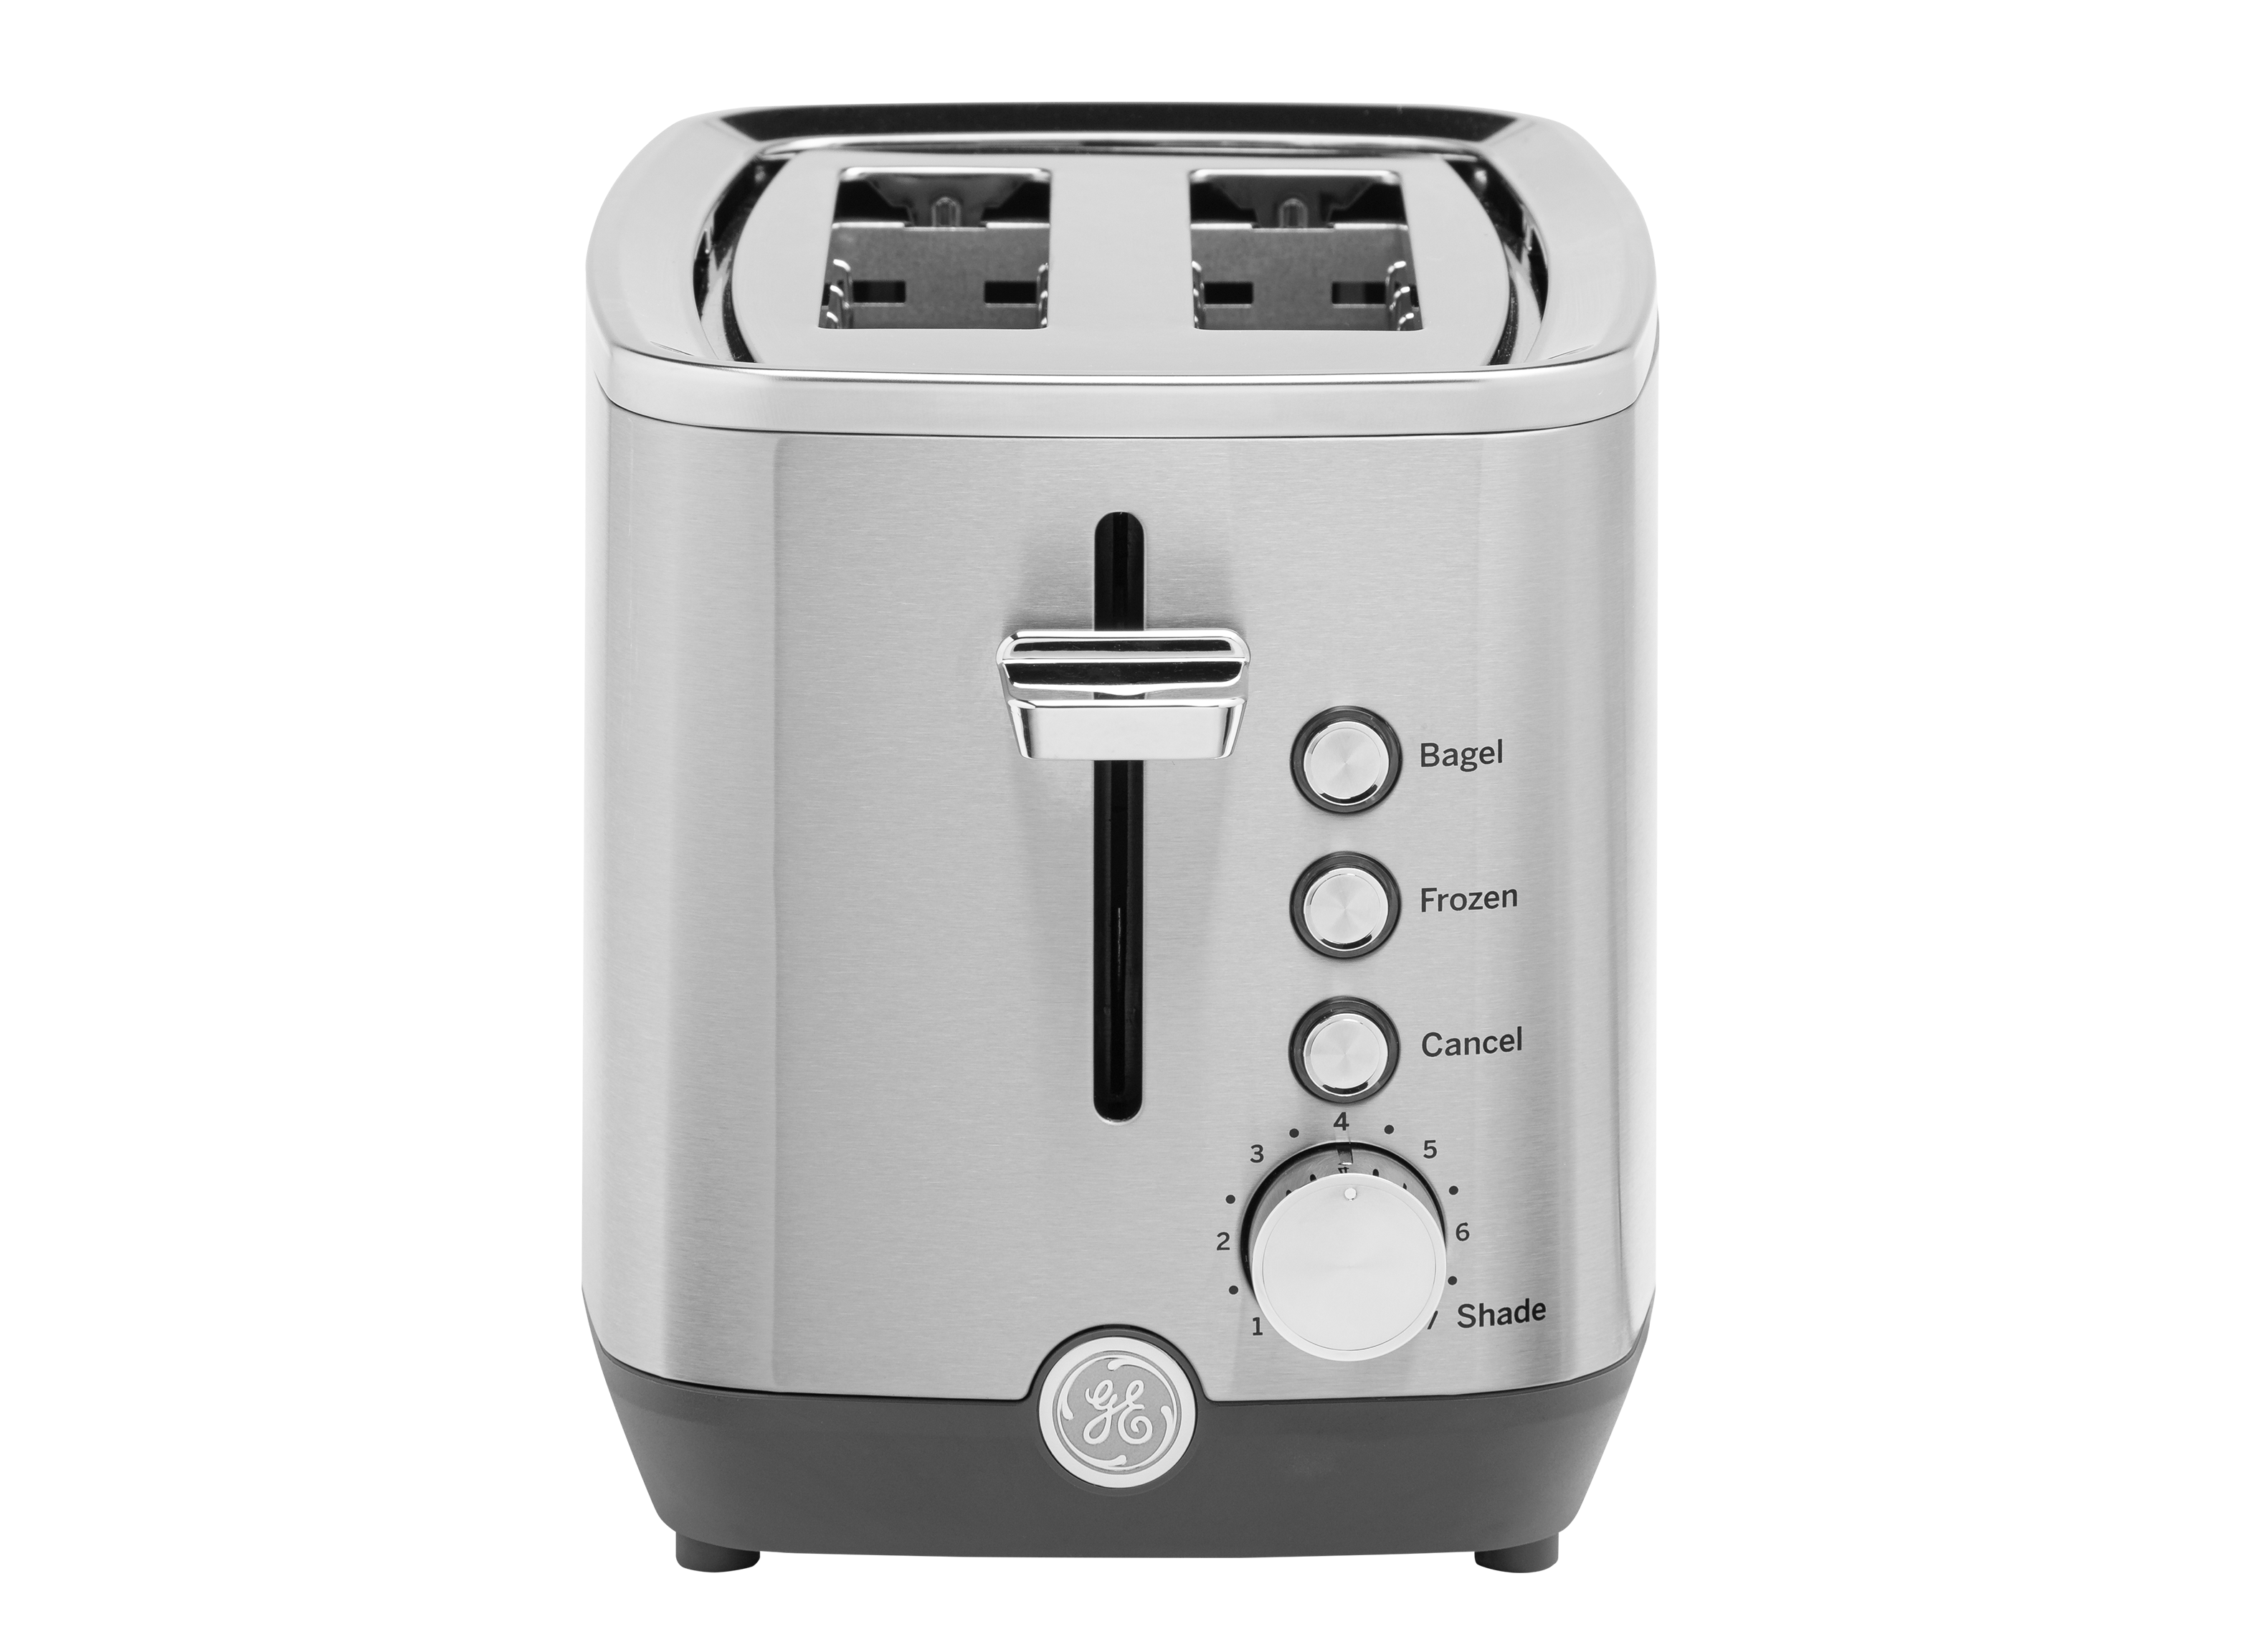 G9TMA2SSPSS in Stainless Steel by GE Appliances in Sioux Falls, SD - GE  2-Slice Toaster